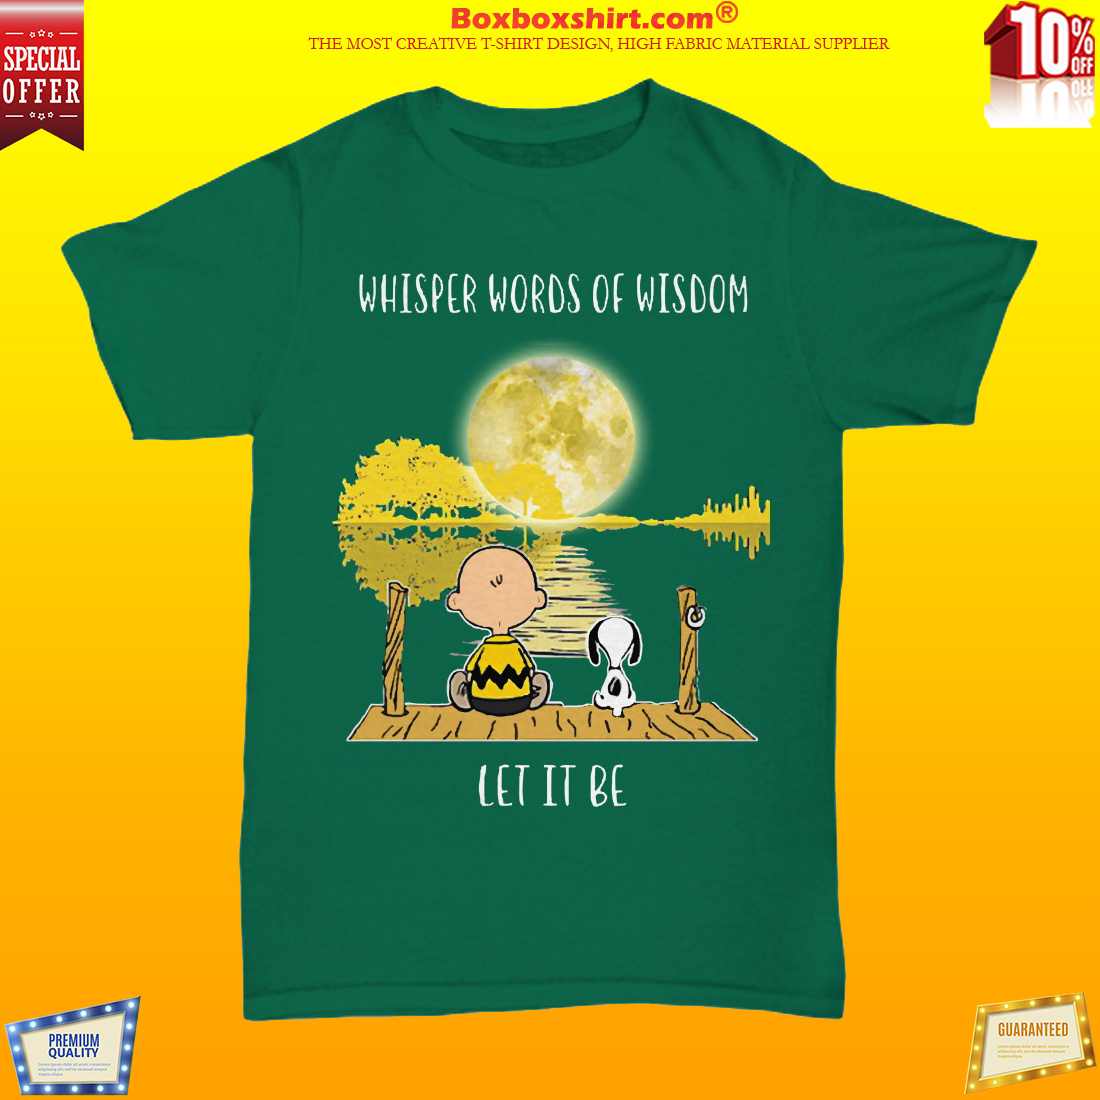 Snoopy Charlie Brown whisper words of wisdom let it be shirt